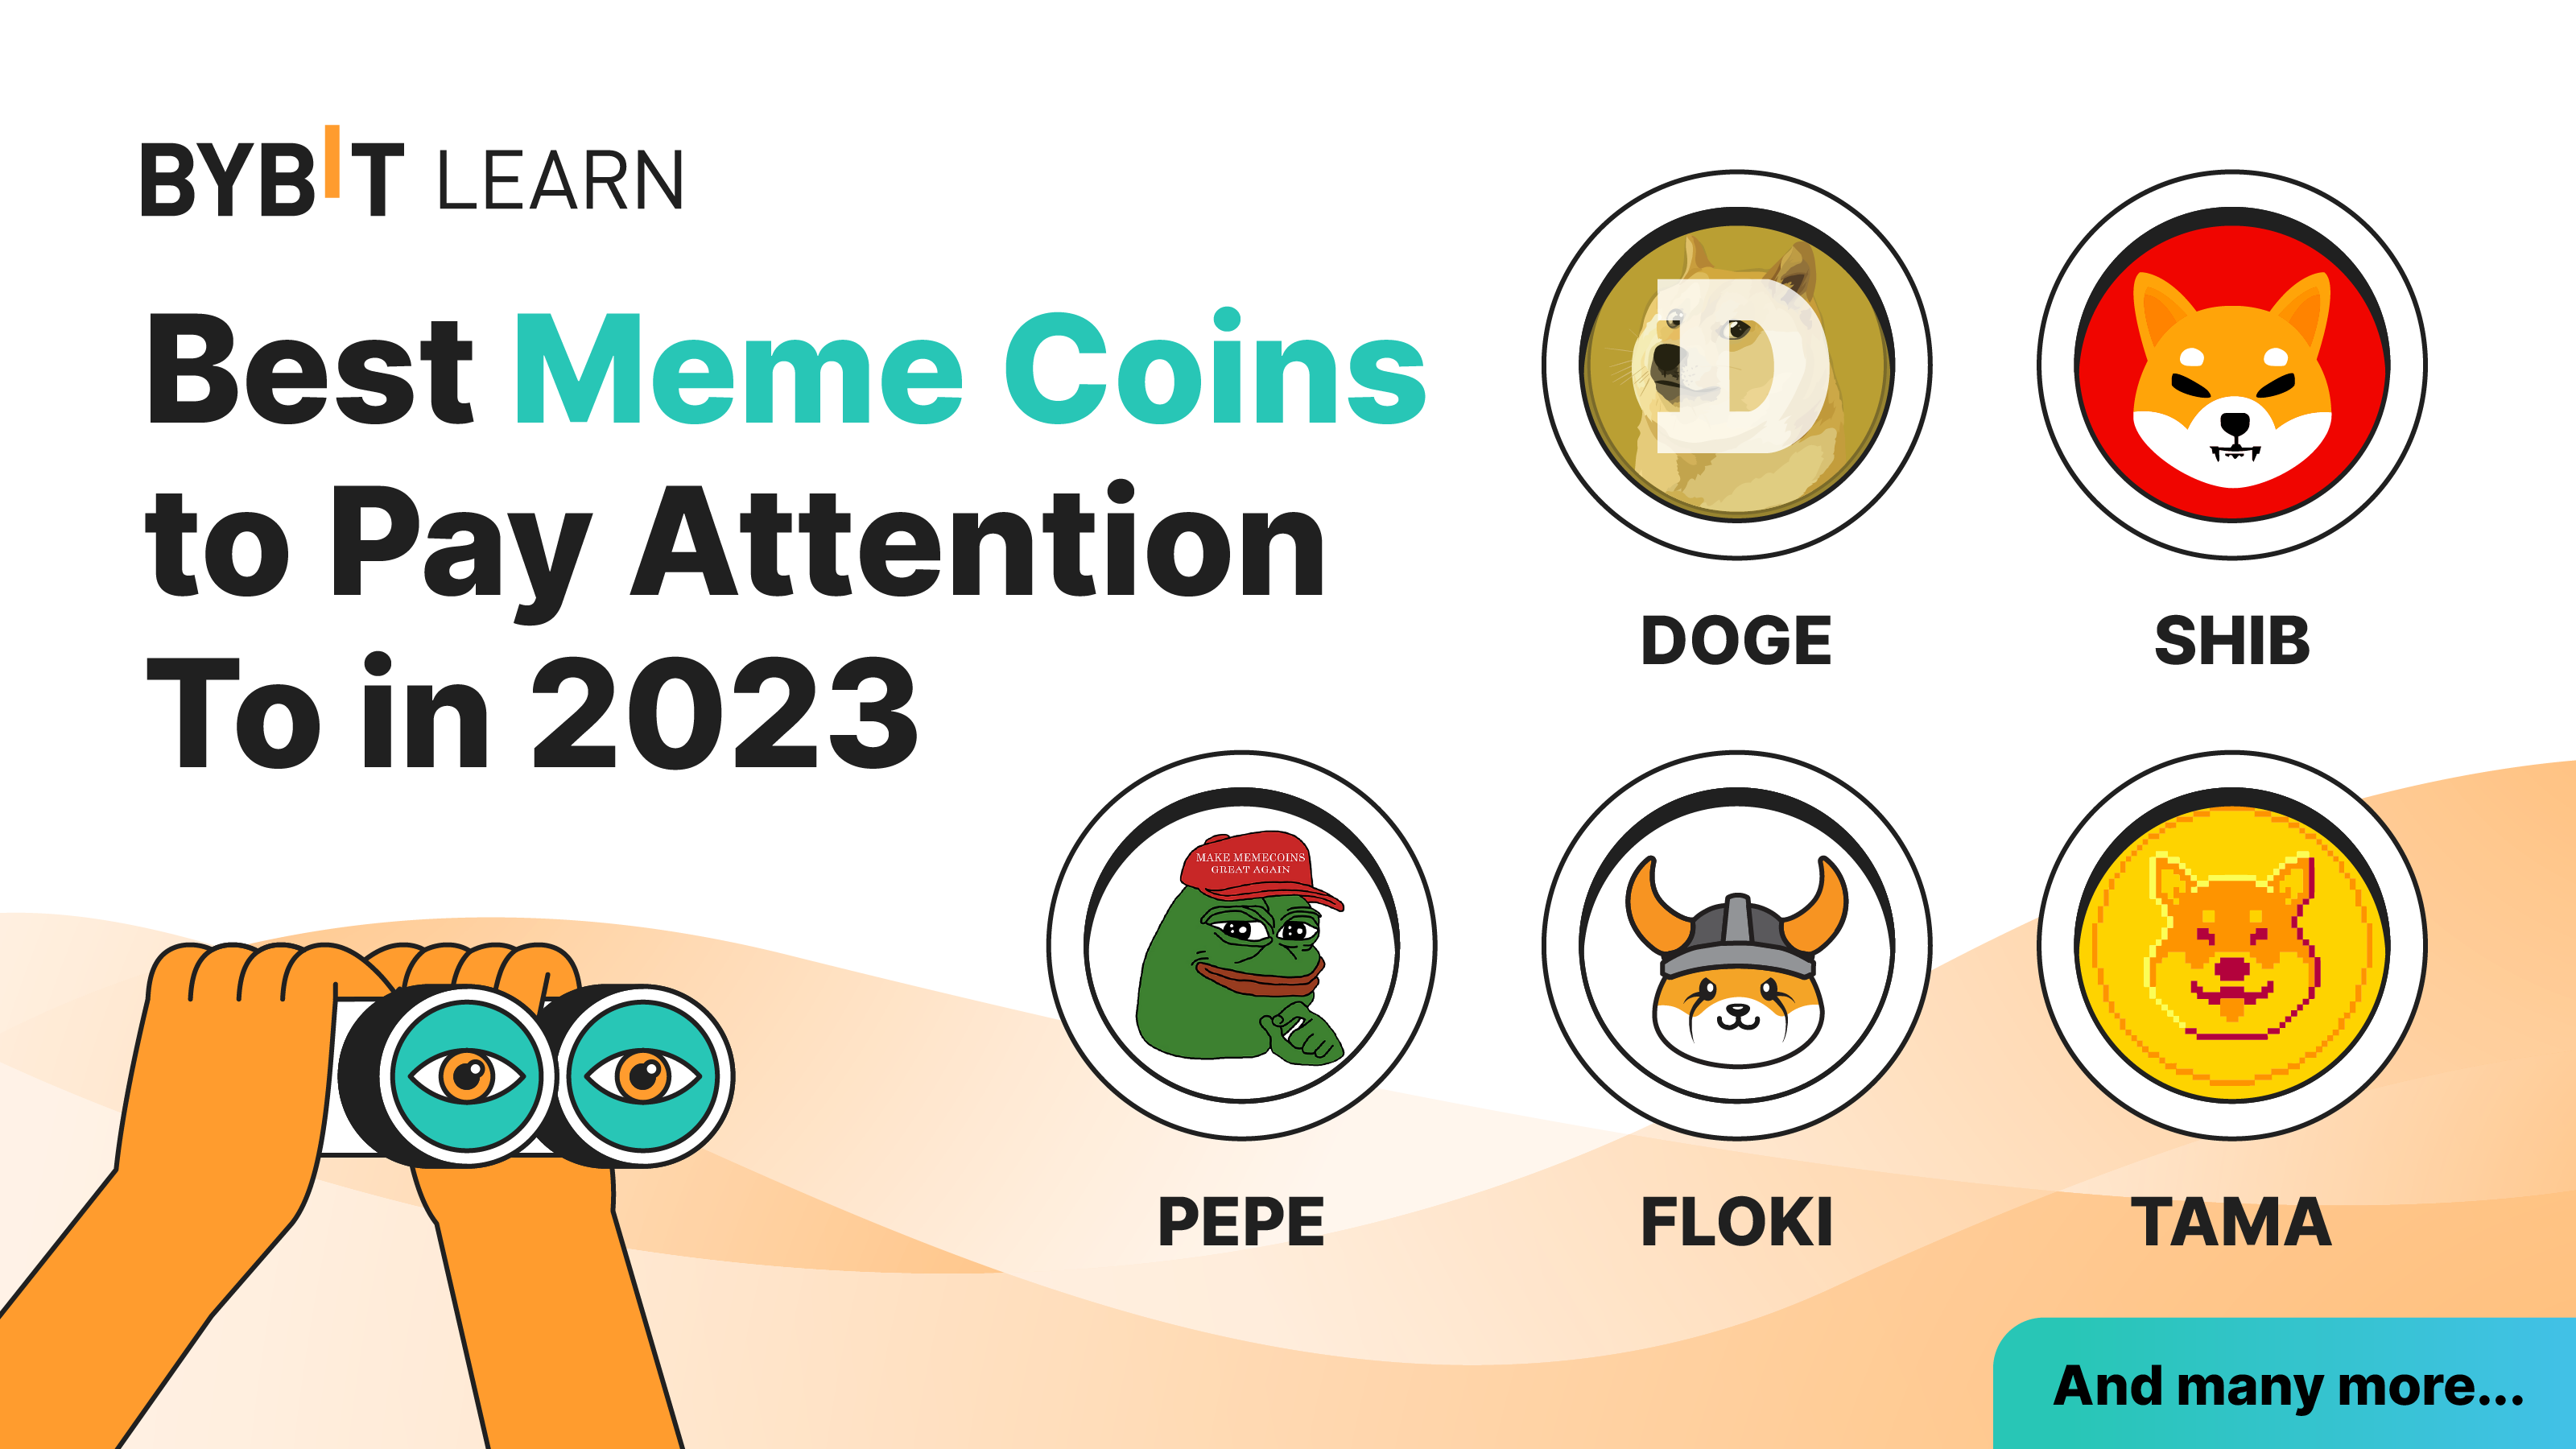 How to make a meme in 2023